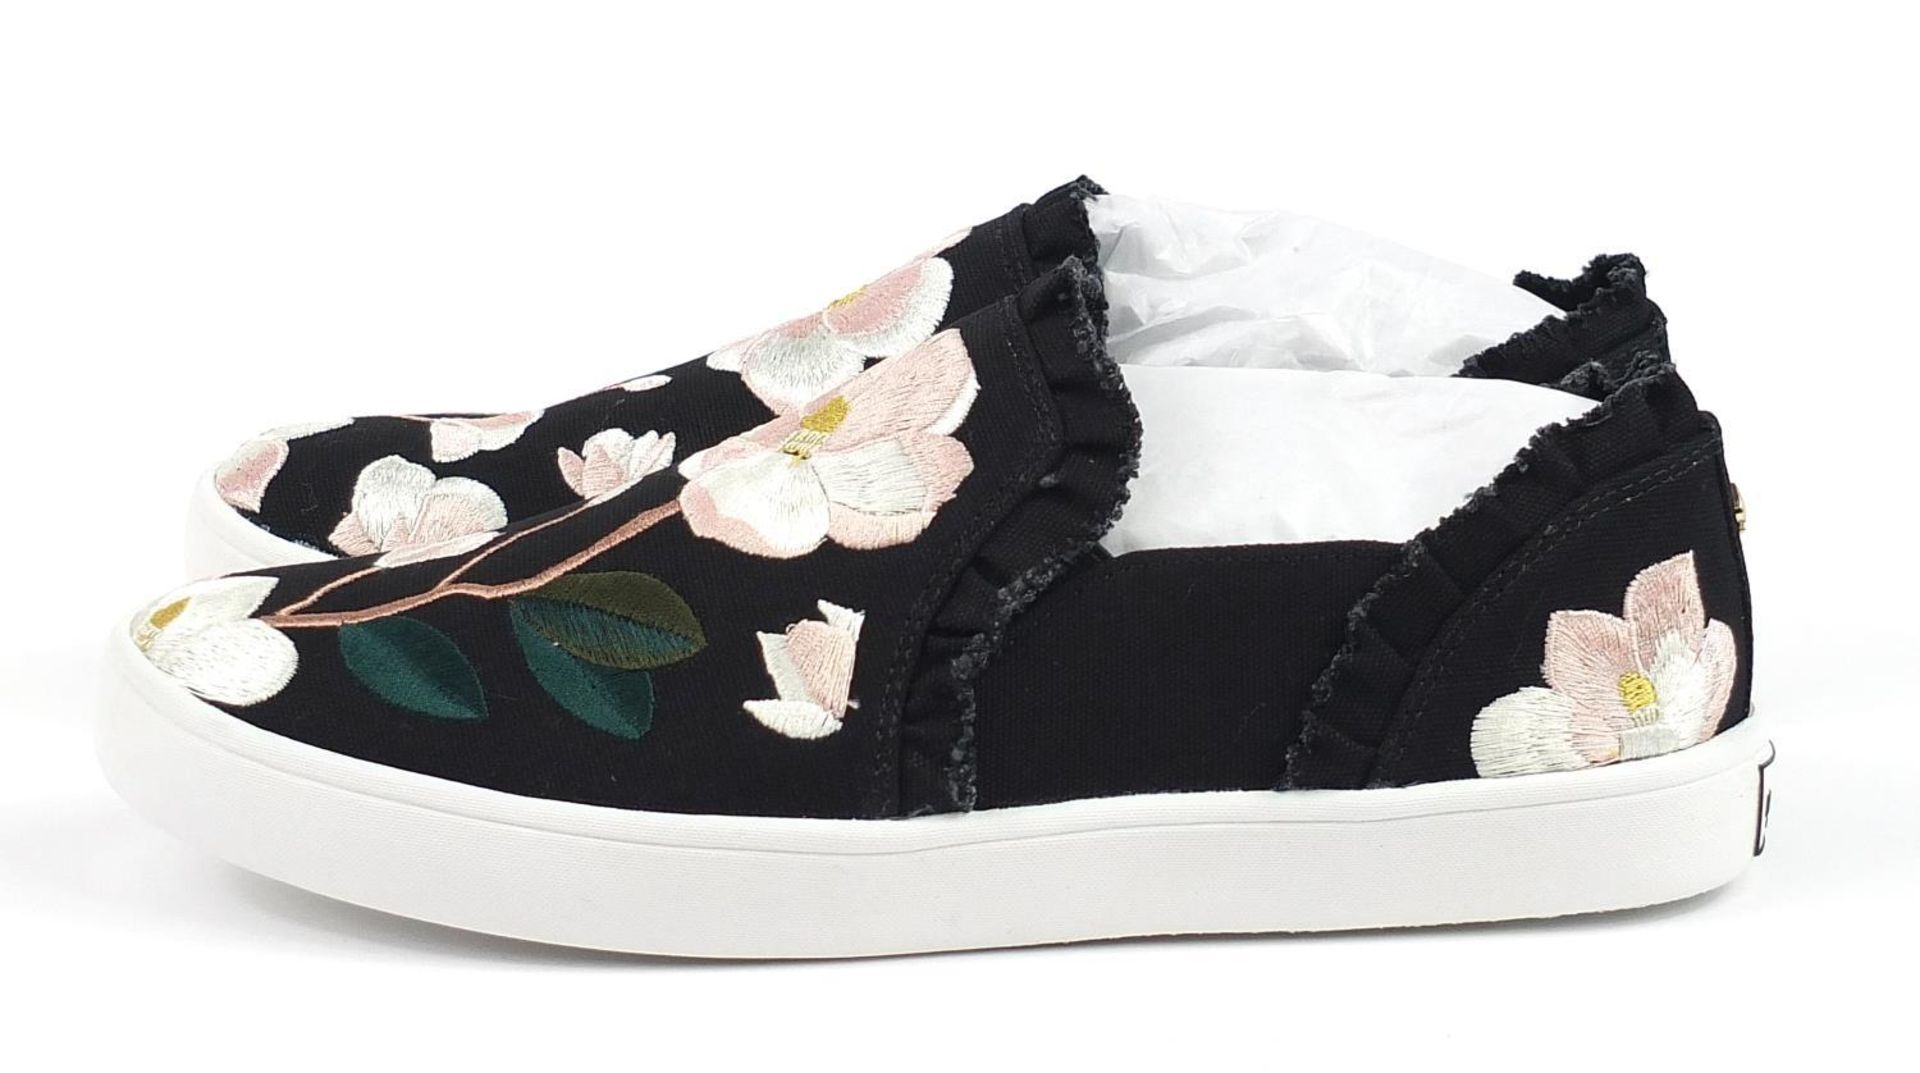 Kate Spade New York, pair of ladies' floral embroidered pumps - Image 4 of 7